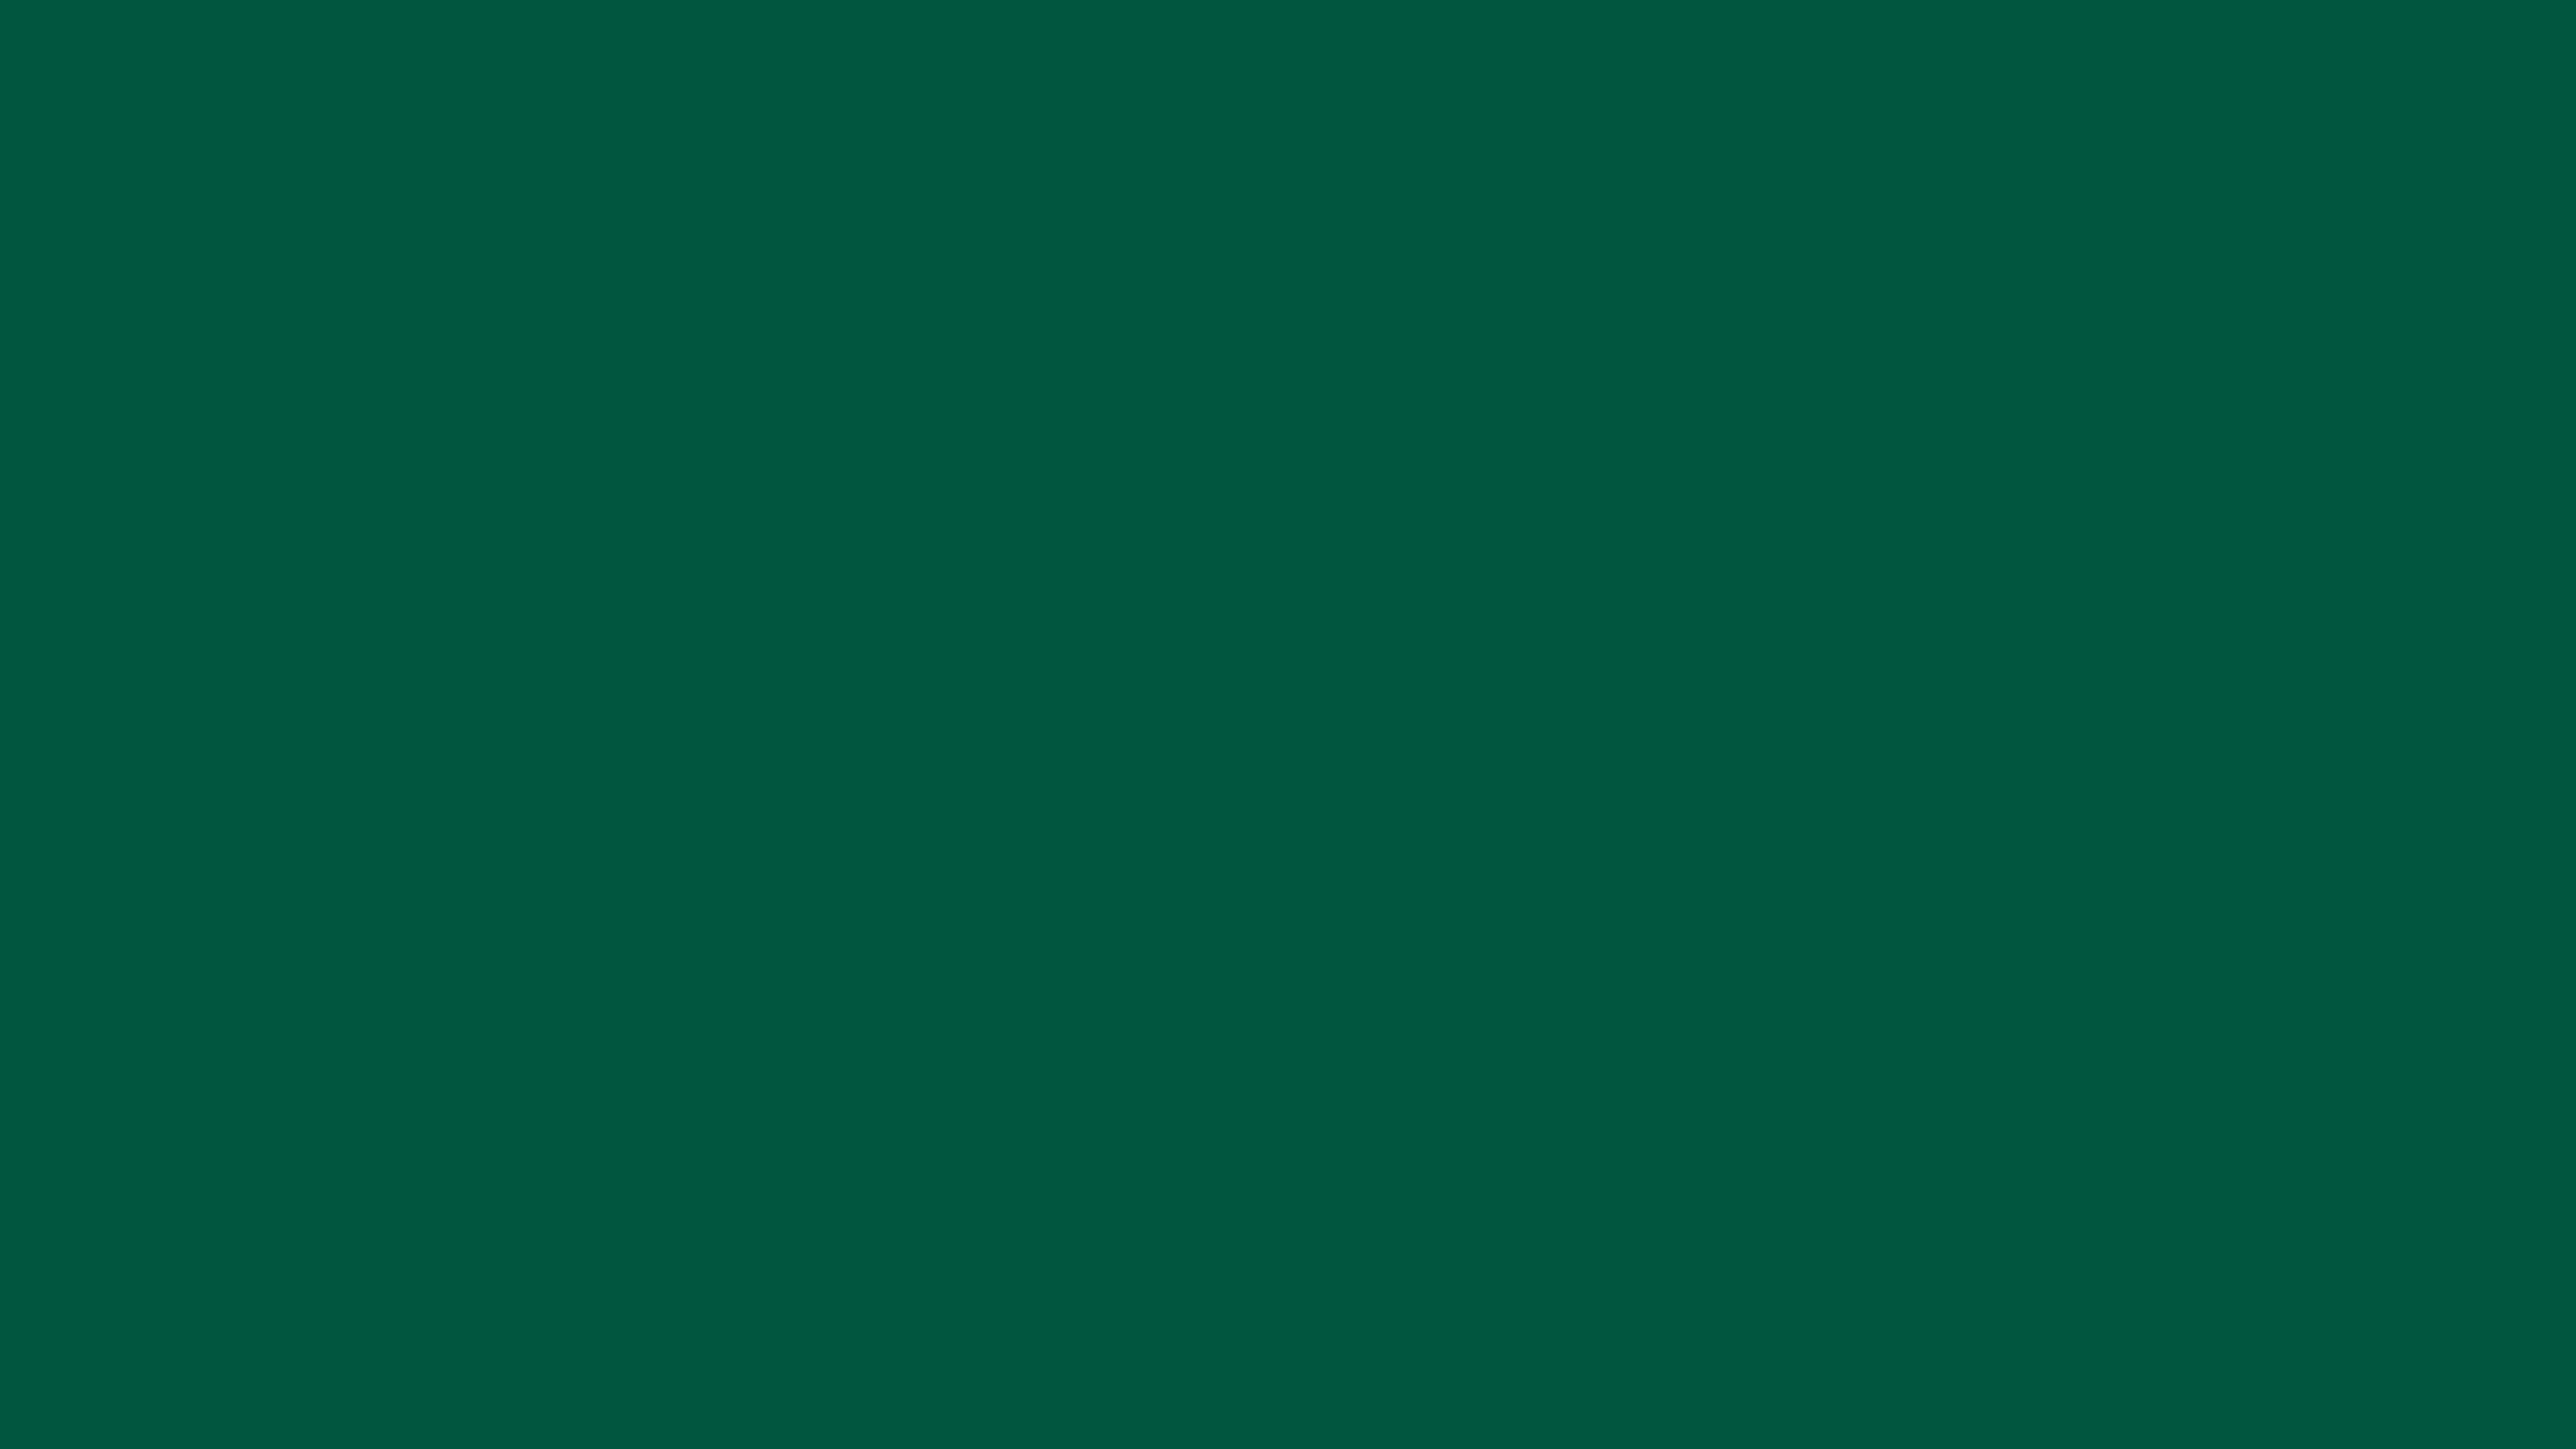 4096x2304 Sacramento State Green Solid Color Background